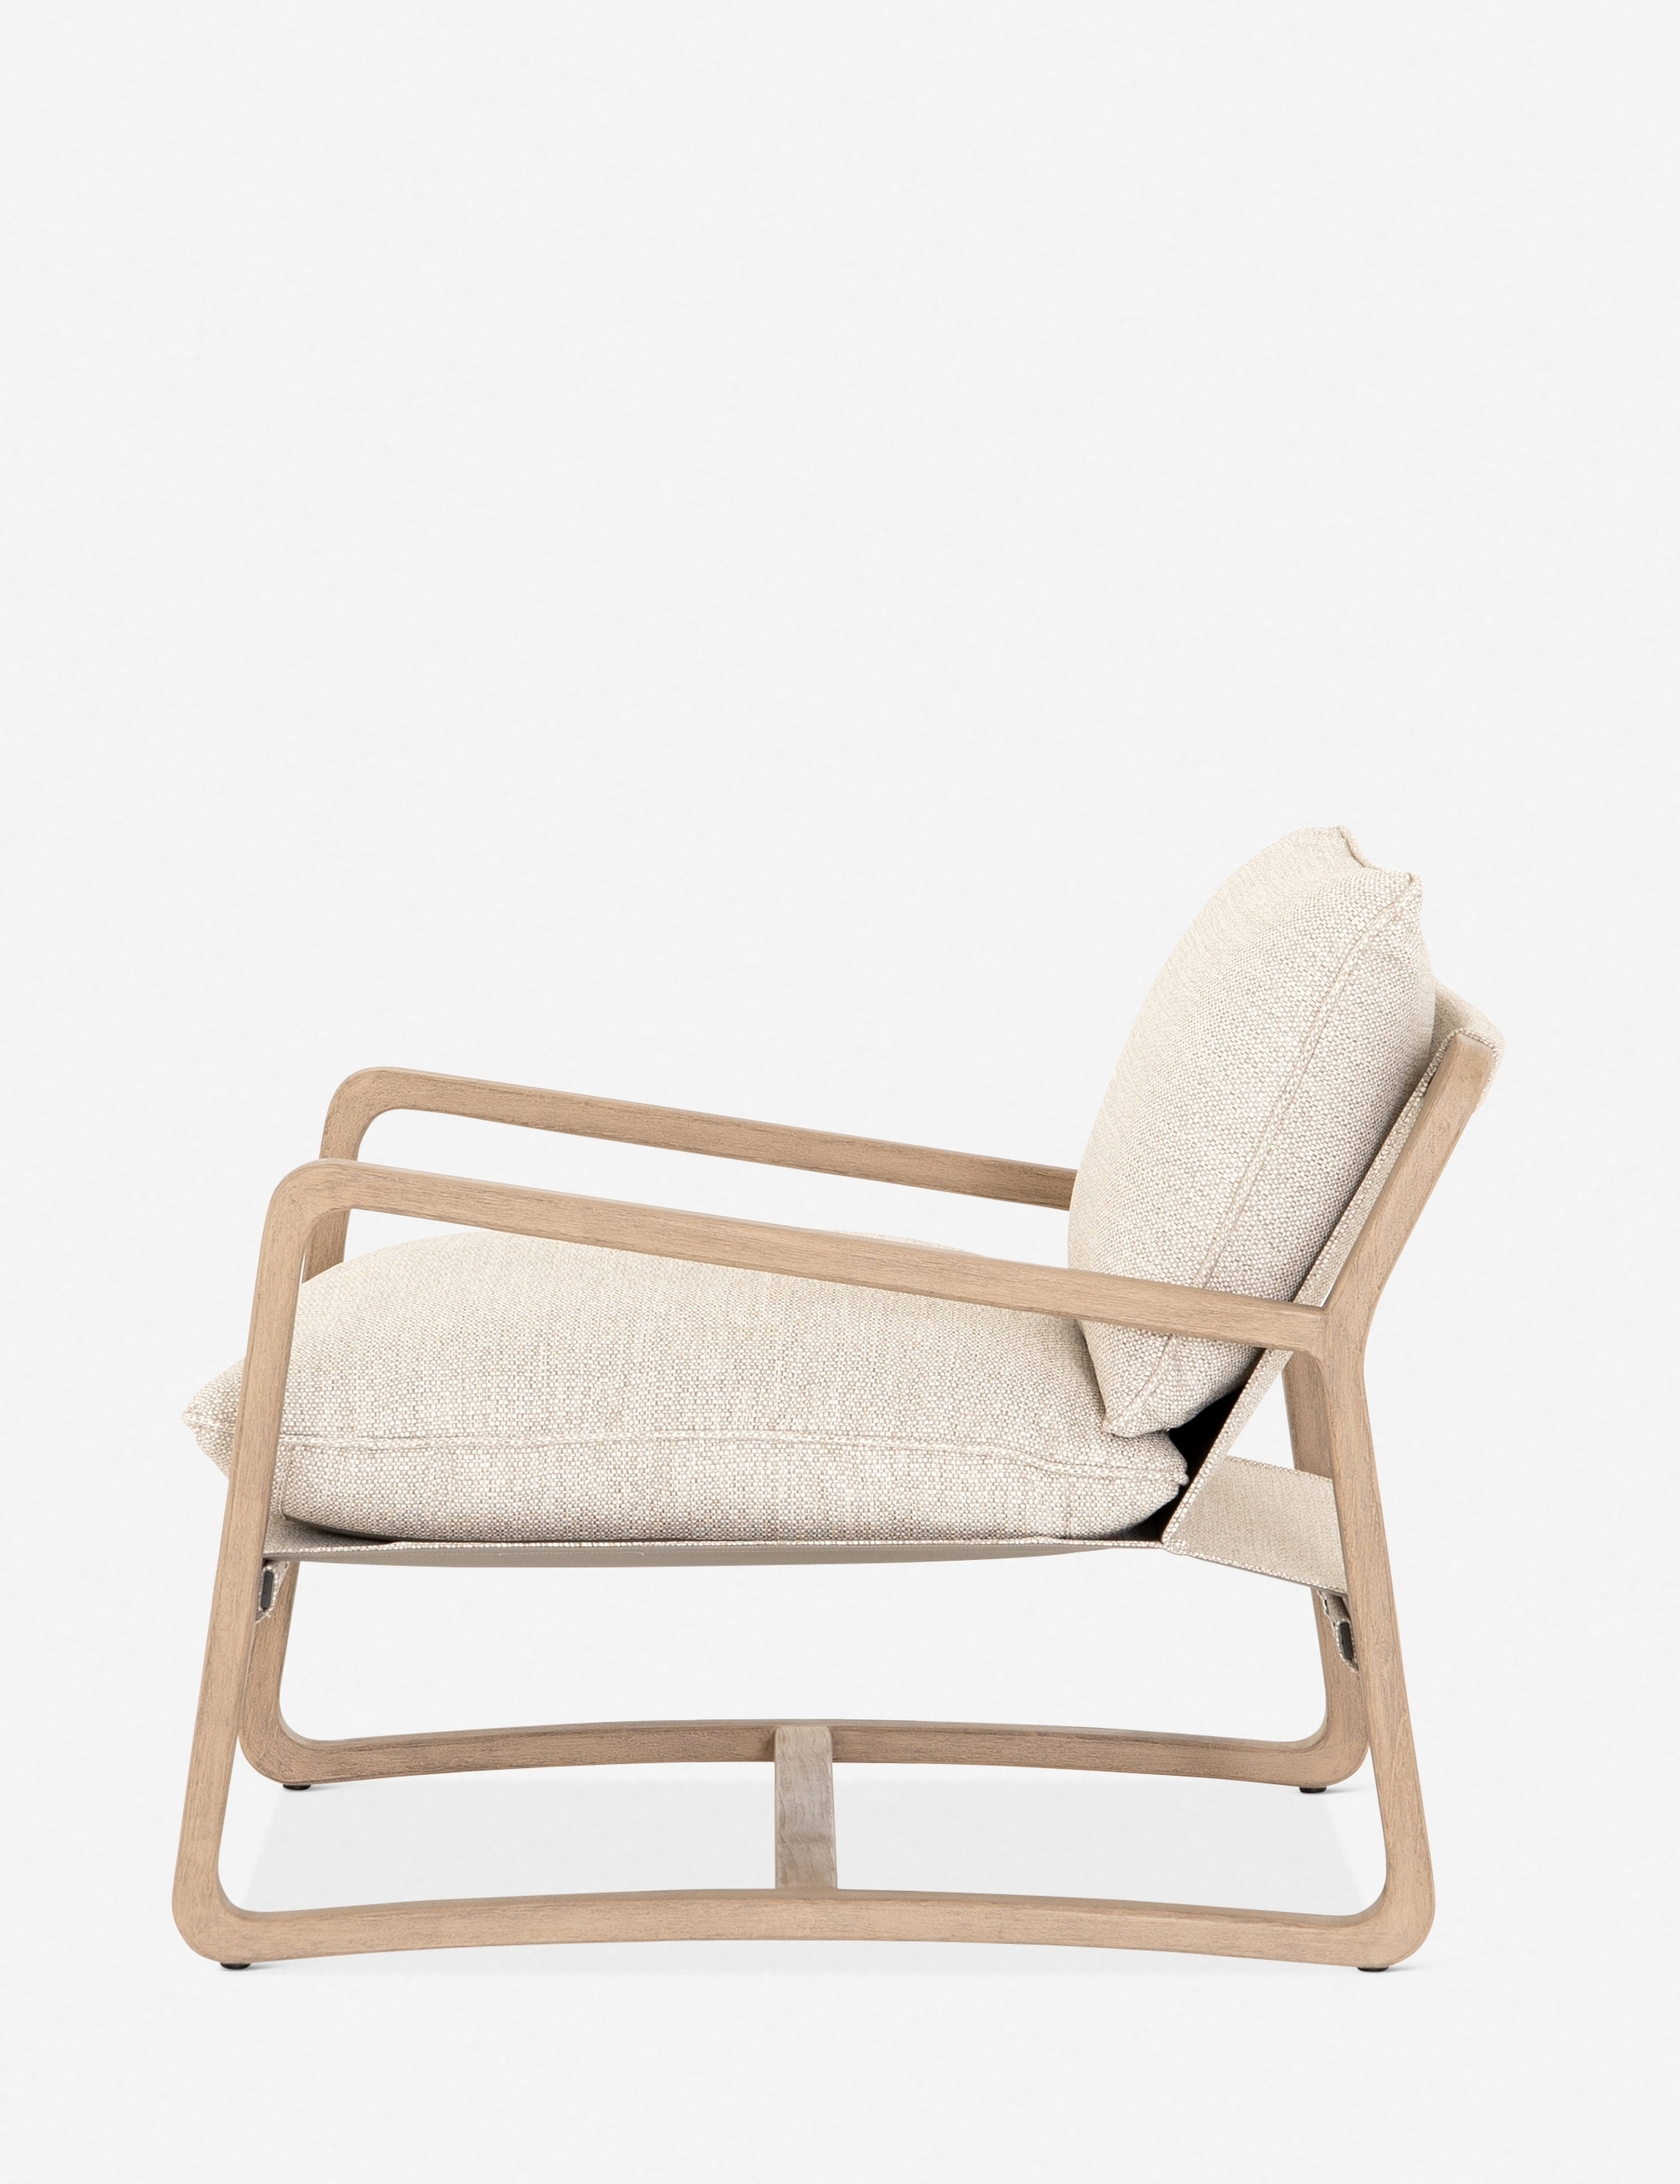 Nunelle Indoor / Outdoor Accent Chair - Image 2